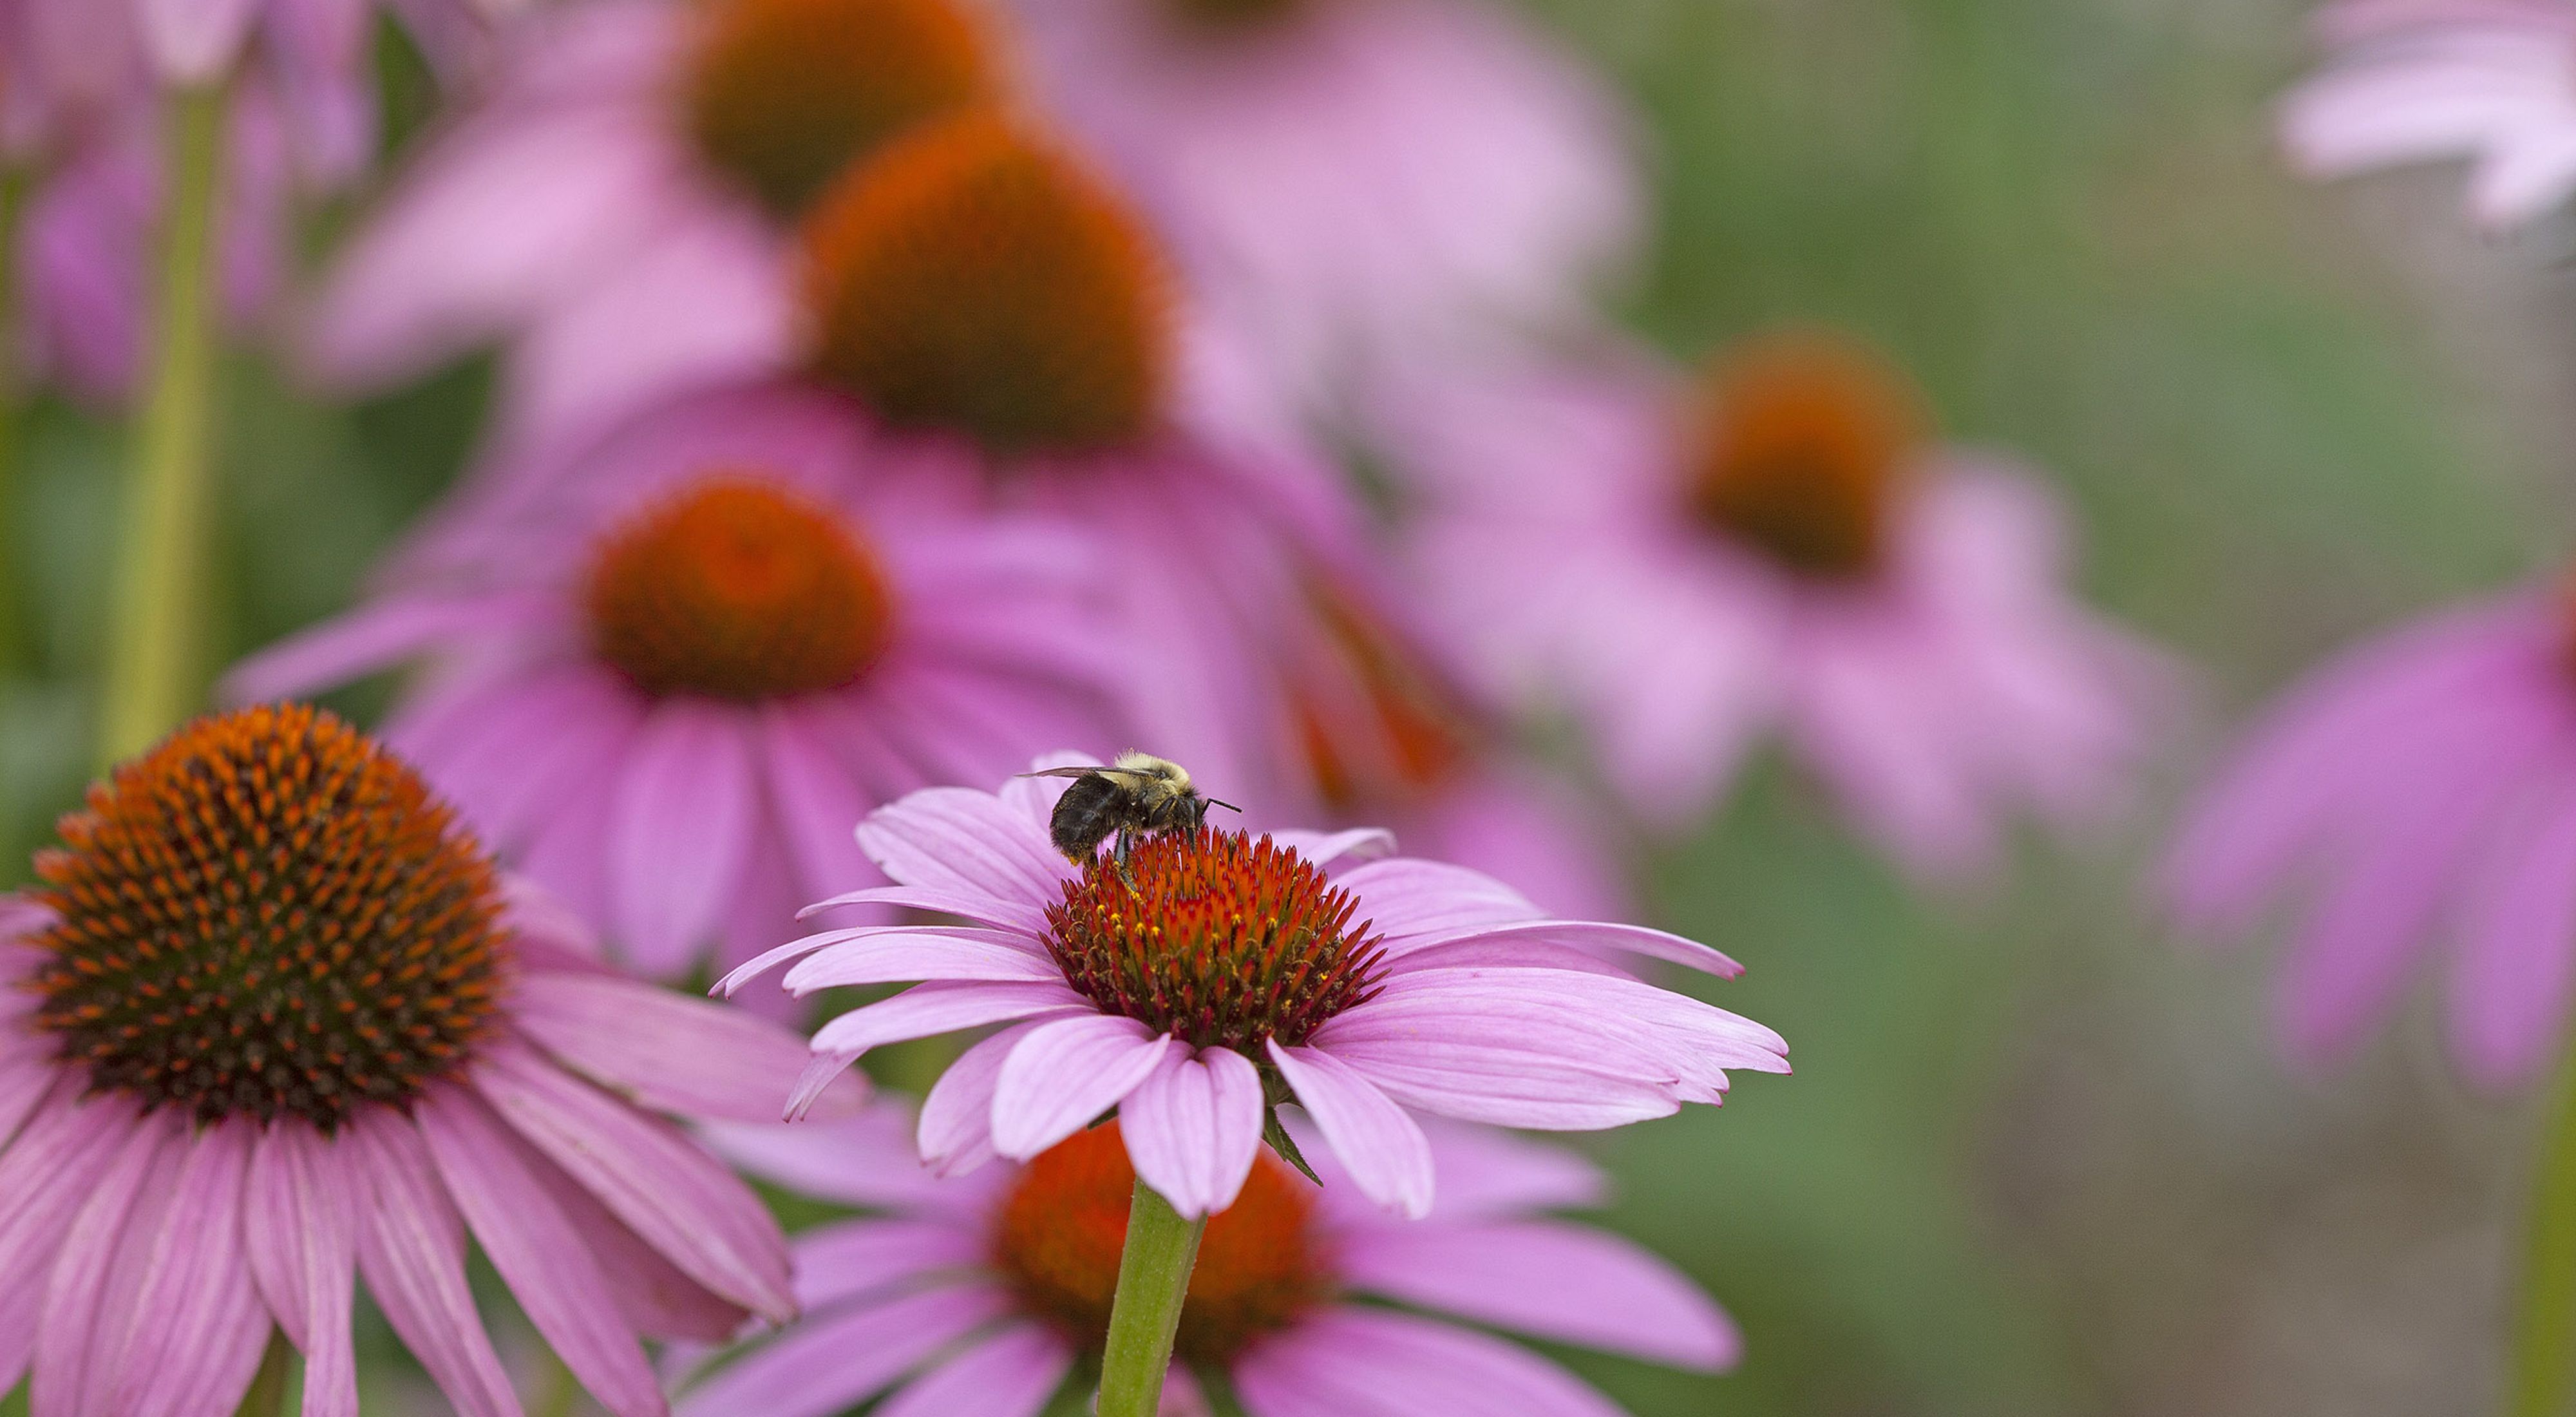 Closeup of a bumblebee on a purple coneflower.